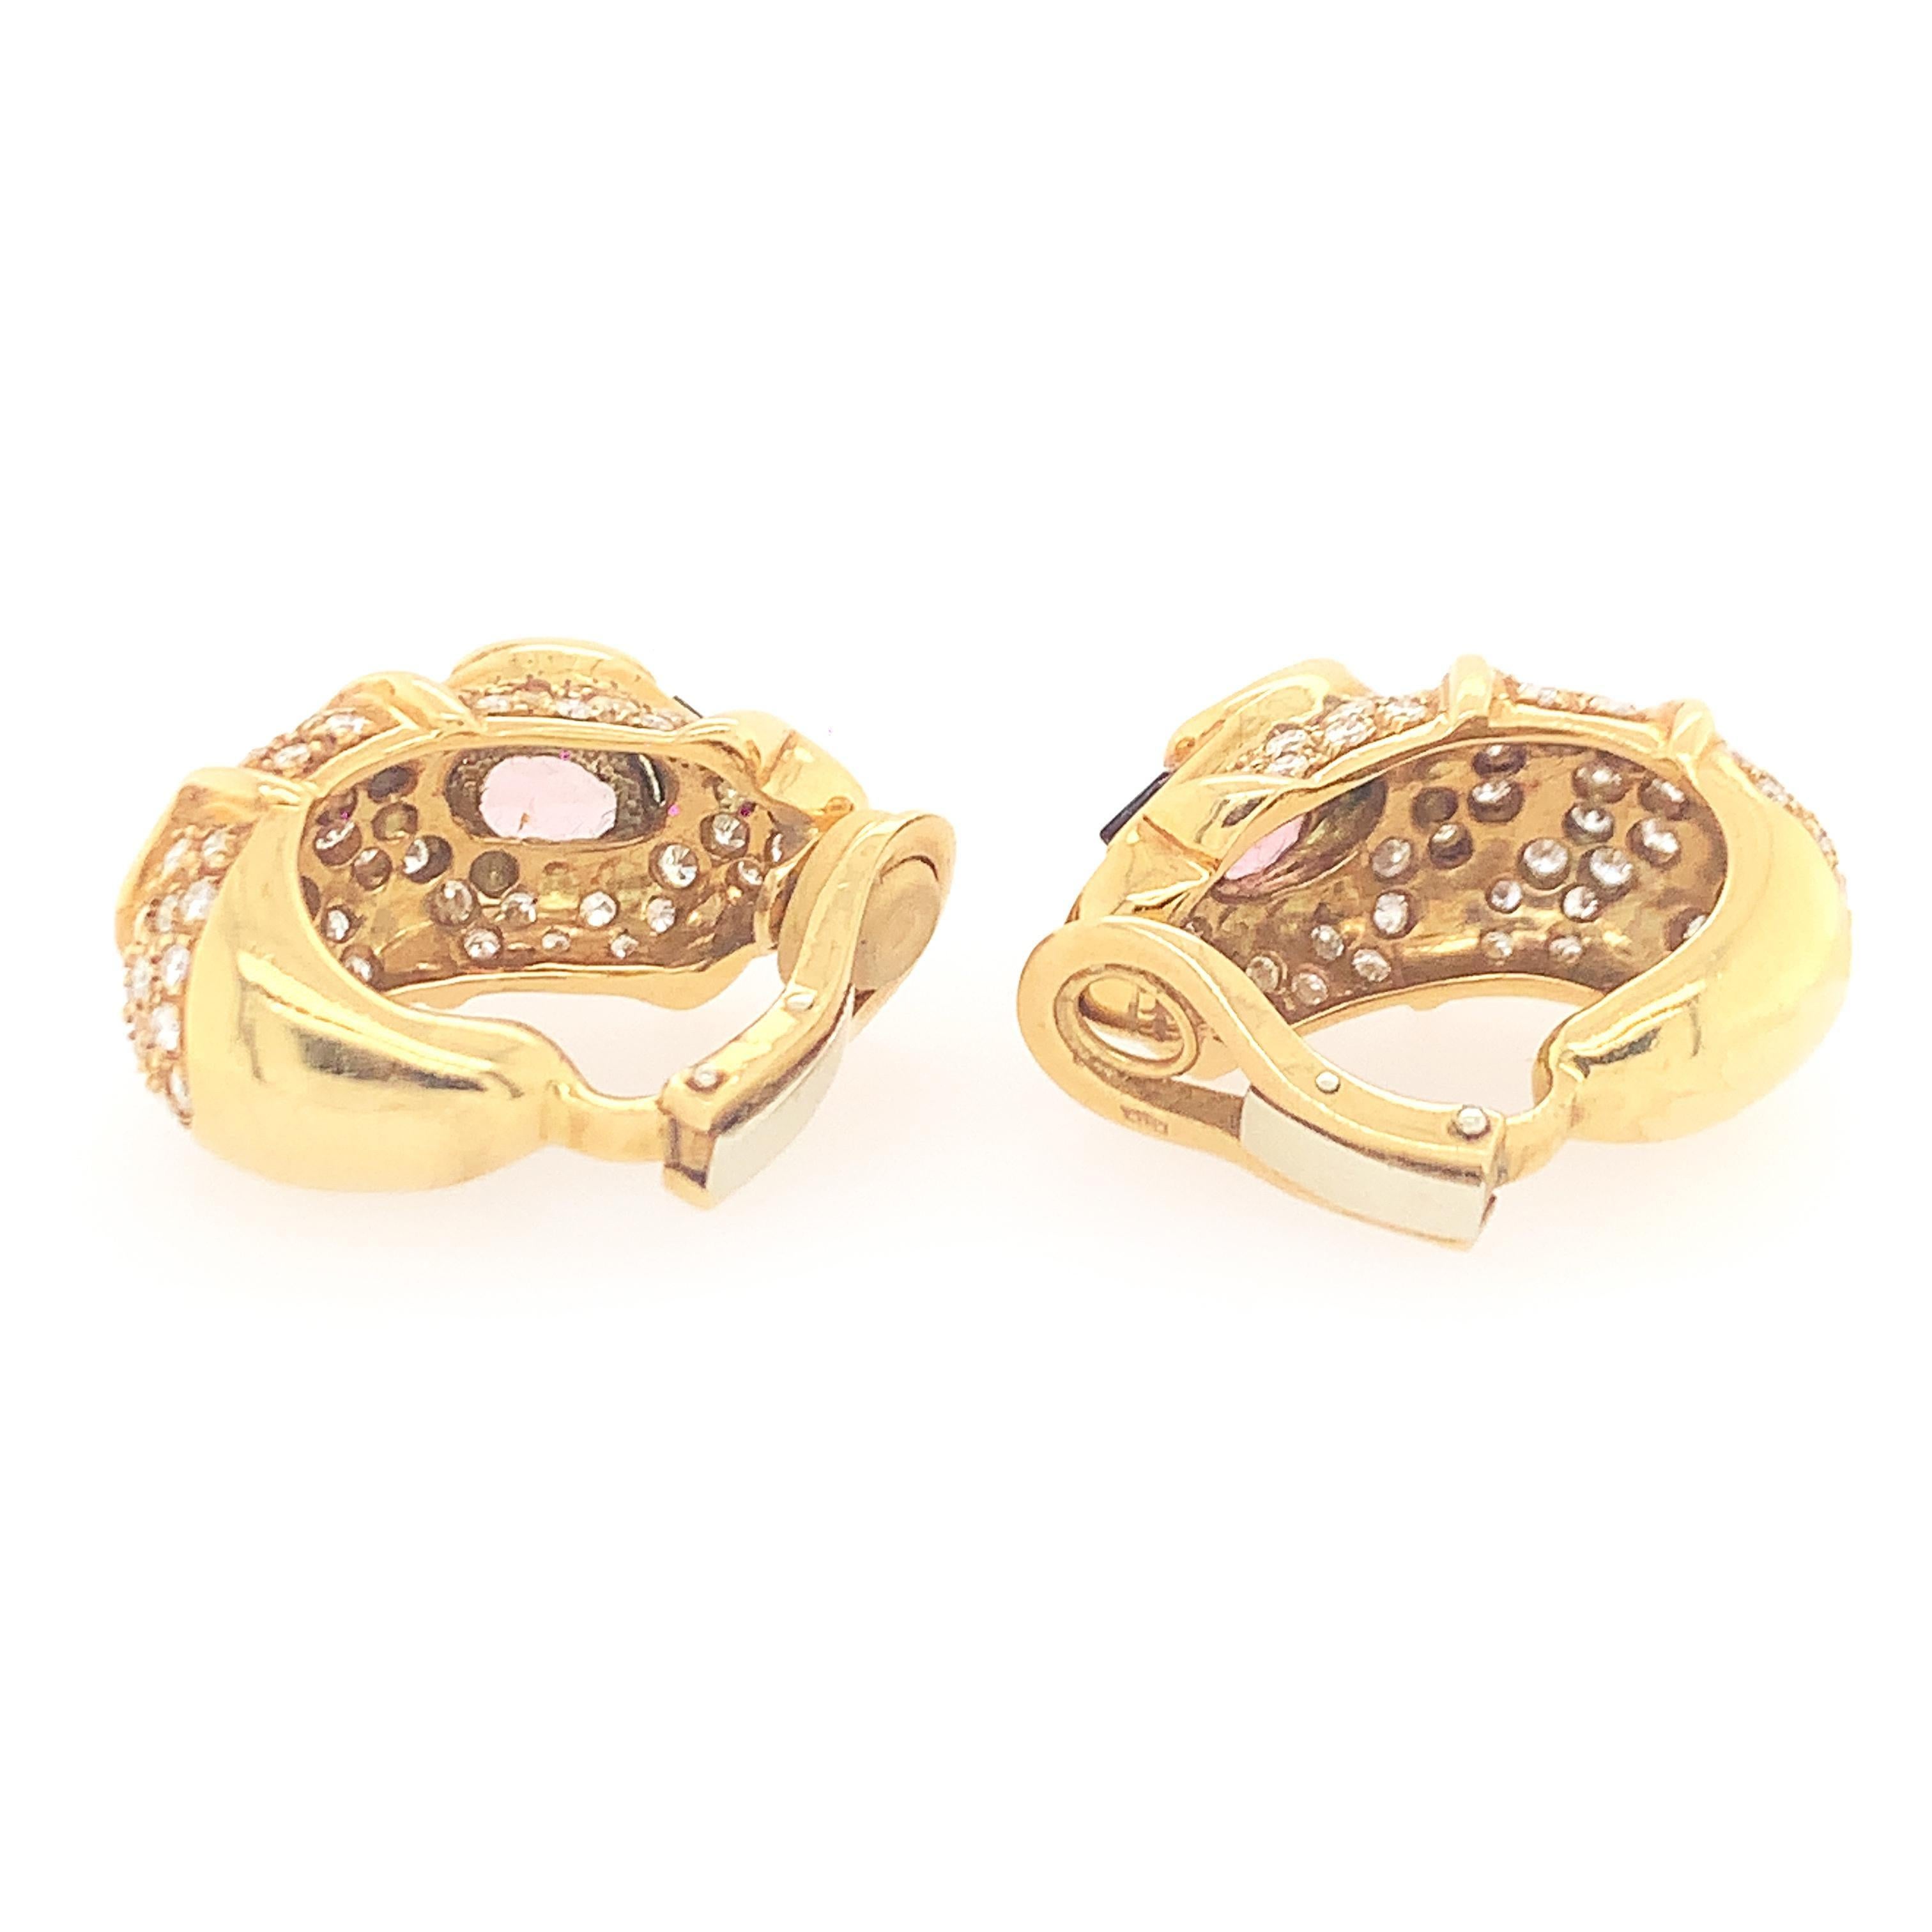 18K Y/gold multi-colored stone diamond earclips. RBC cut diamonds weighing approx. 3.20 cts, GH VS-SI, stamps 750 measures 1 1/4 x 1/2 inch, weight 18.2 dwt.